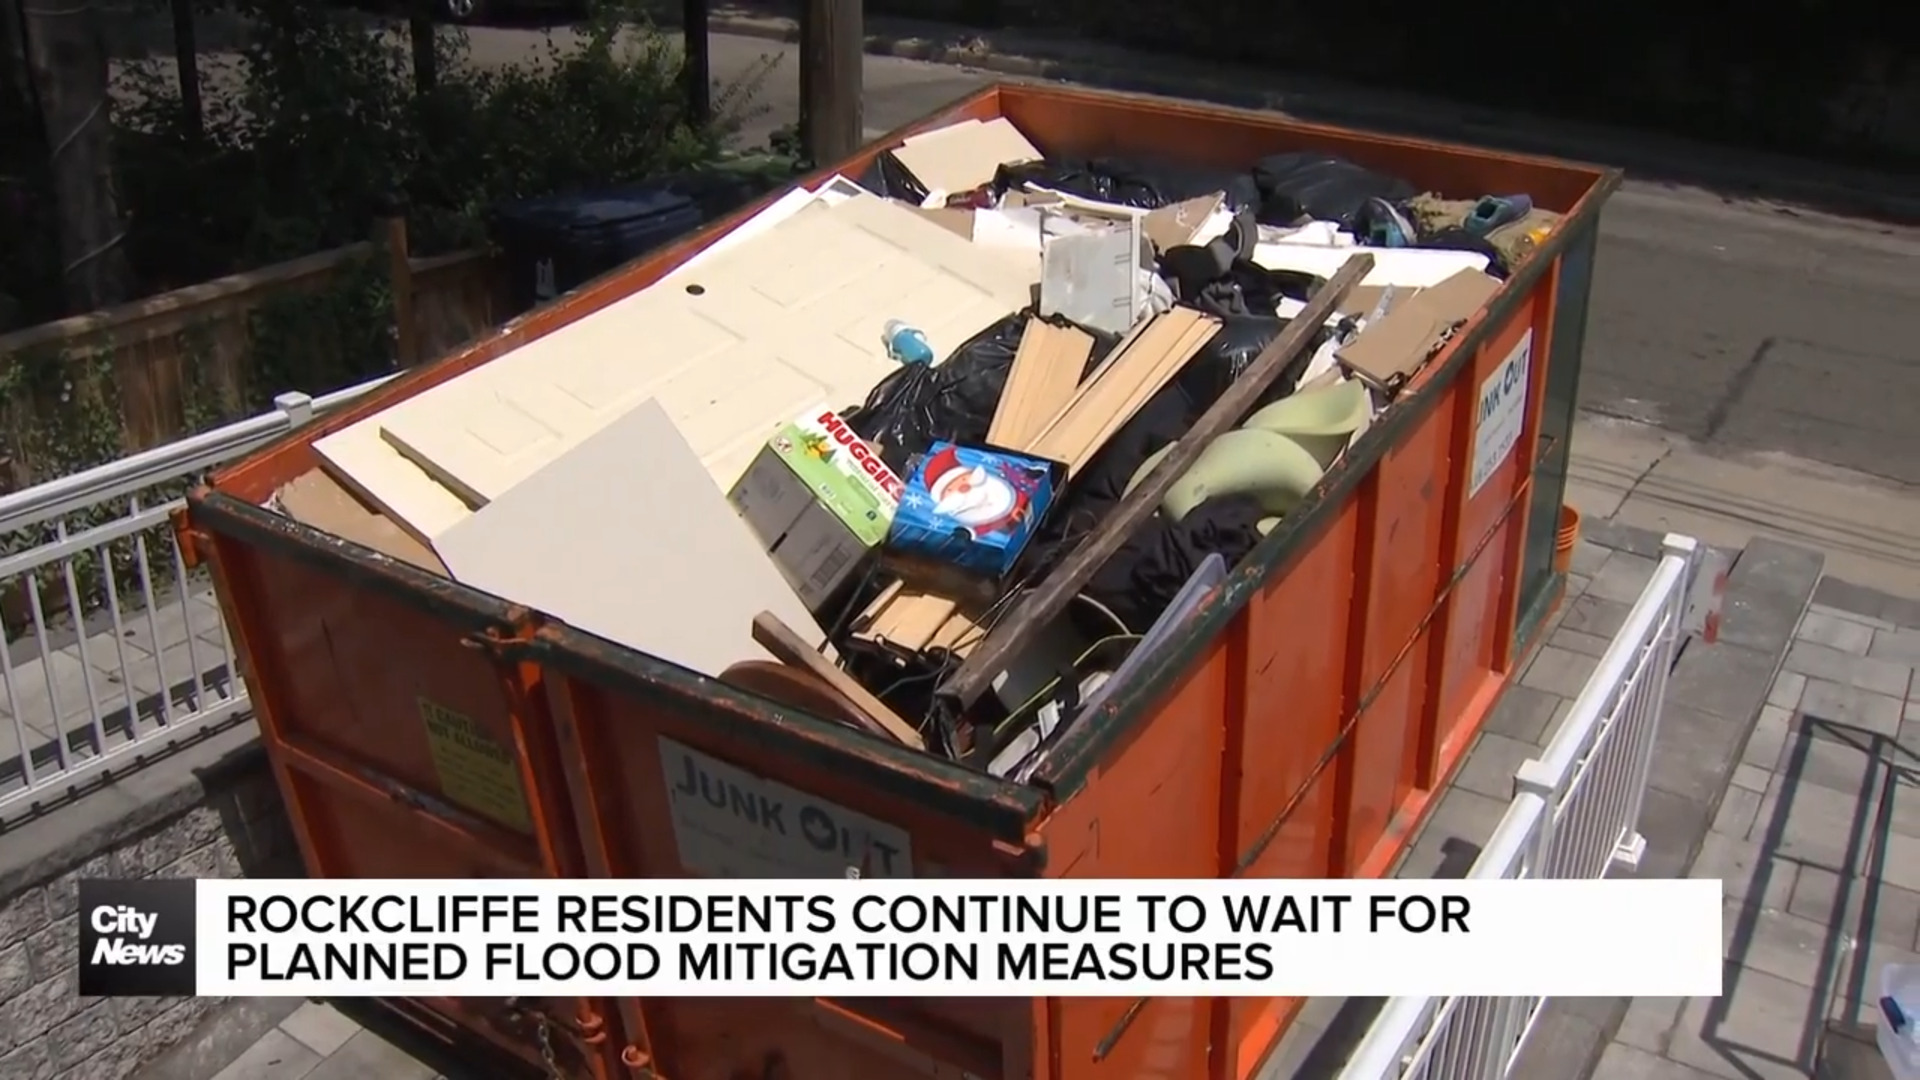 Rockcliffe residents waiting for planned flood mitigation measures